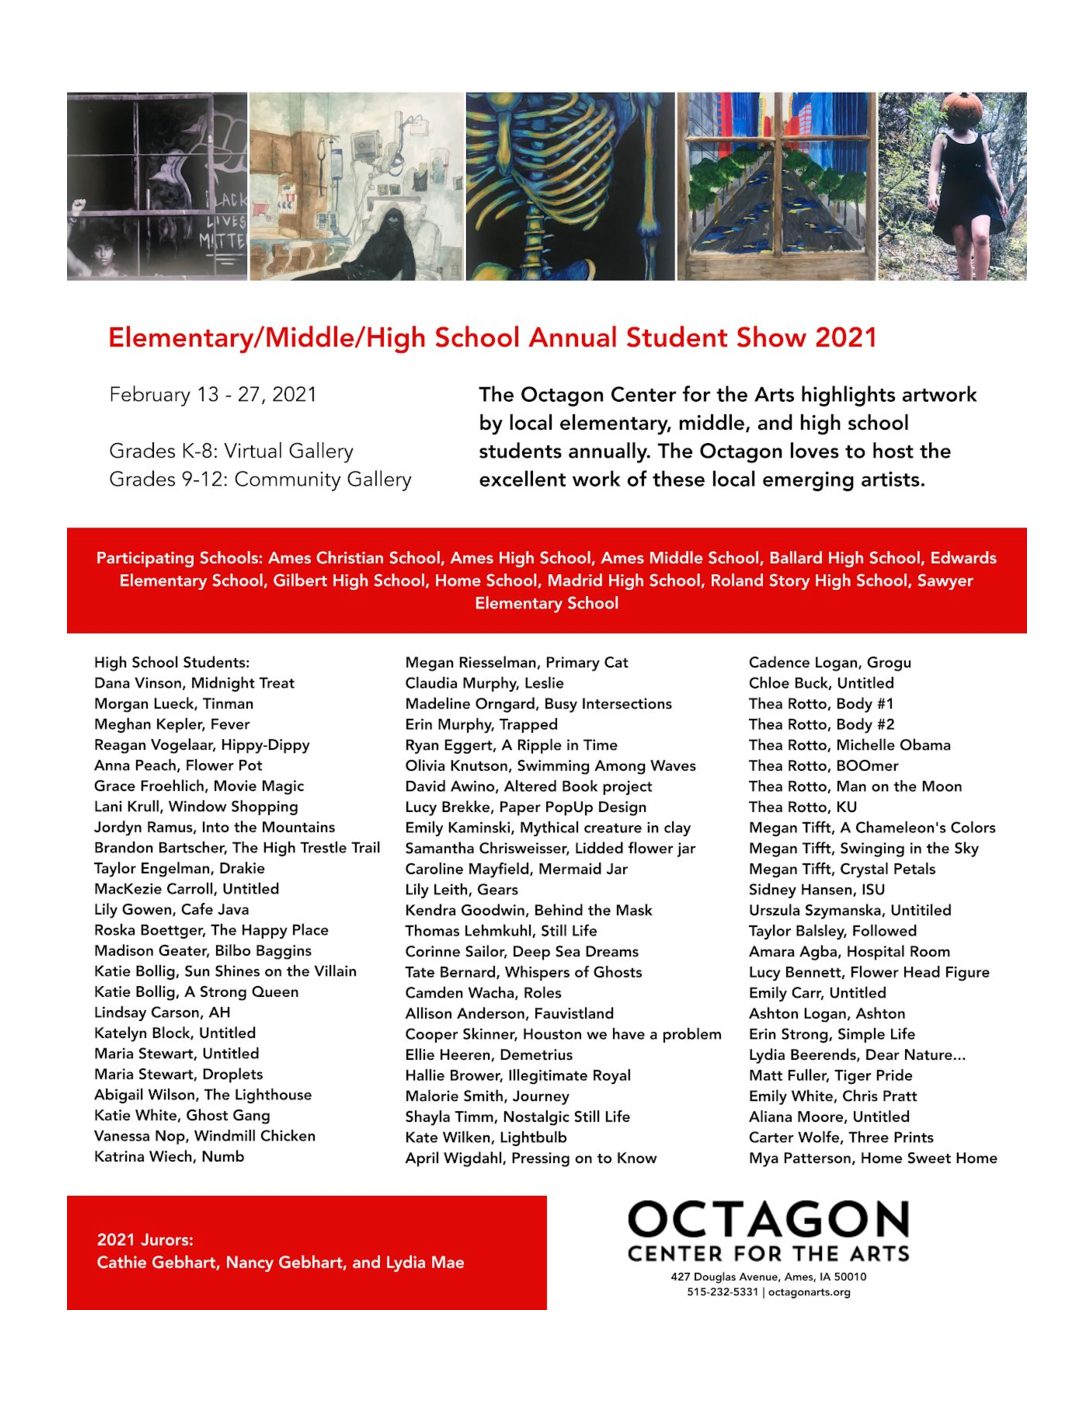 2021 Elementary / Middle / High Exhibit: An Exhibition of Local Elementary, Middle, and High School Students